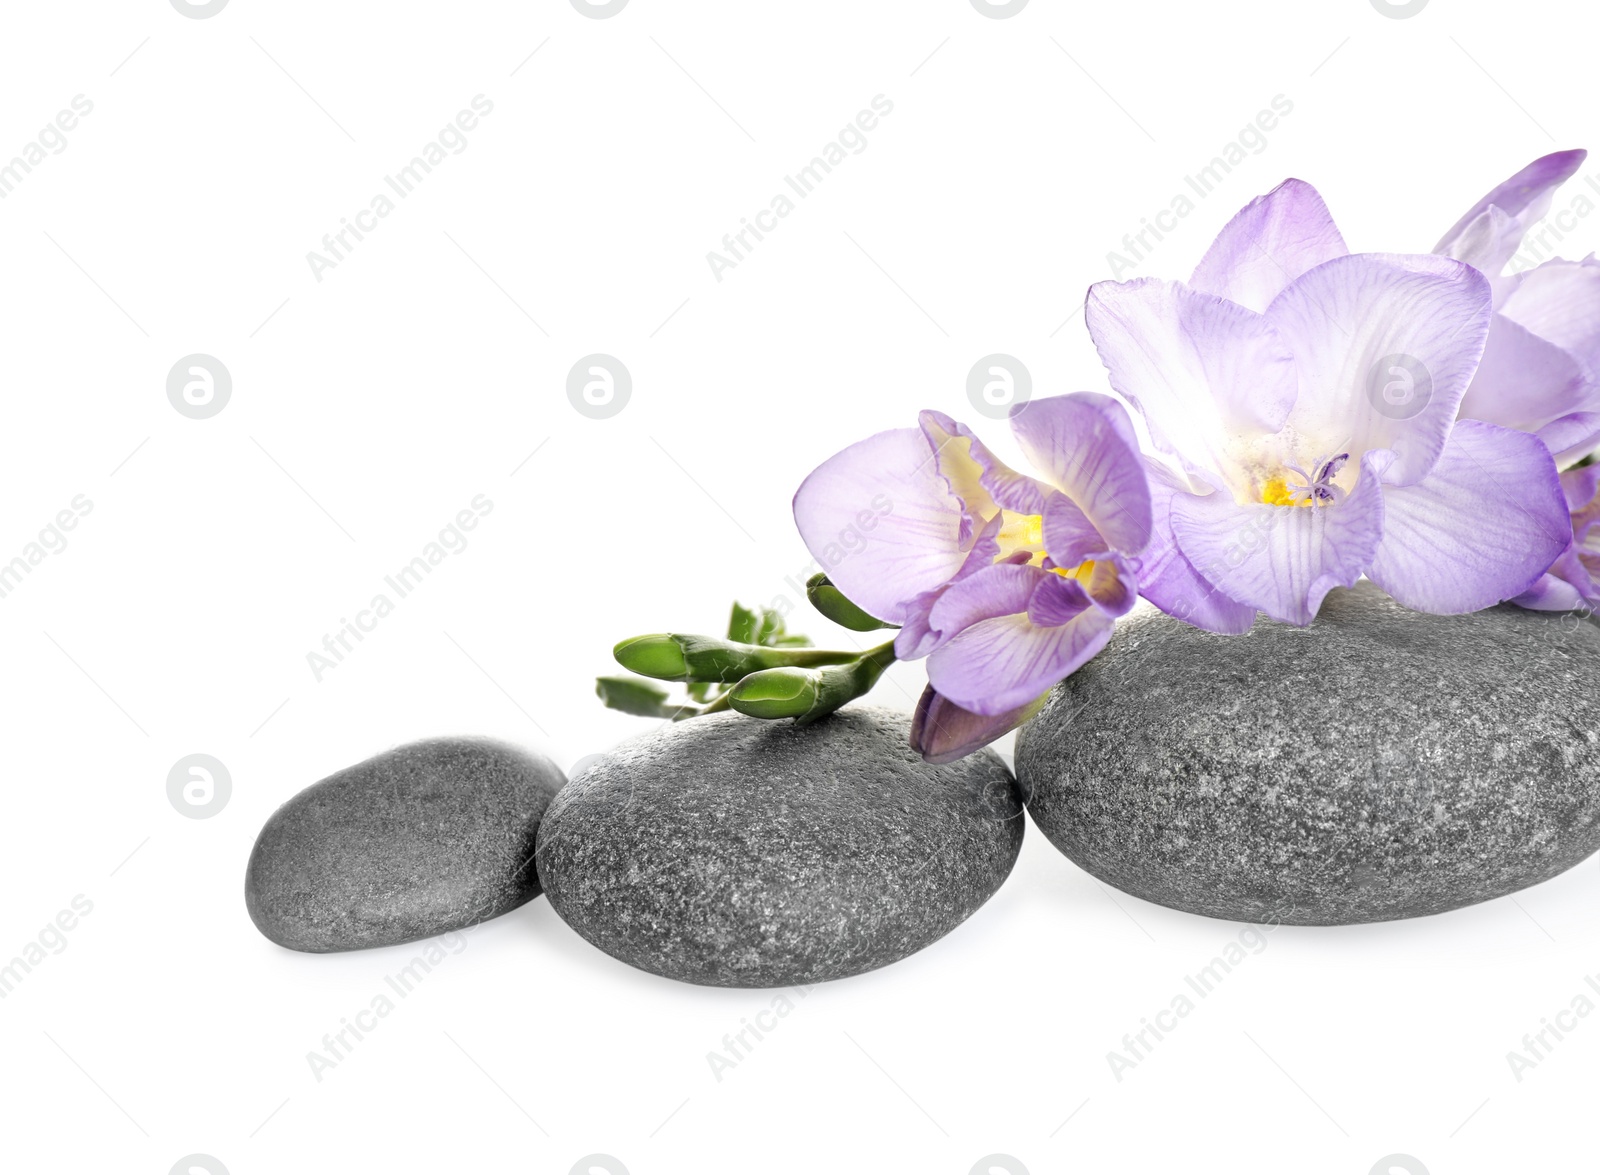 Photo of Spa stones and freesia flowers on white background